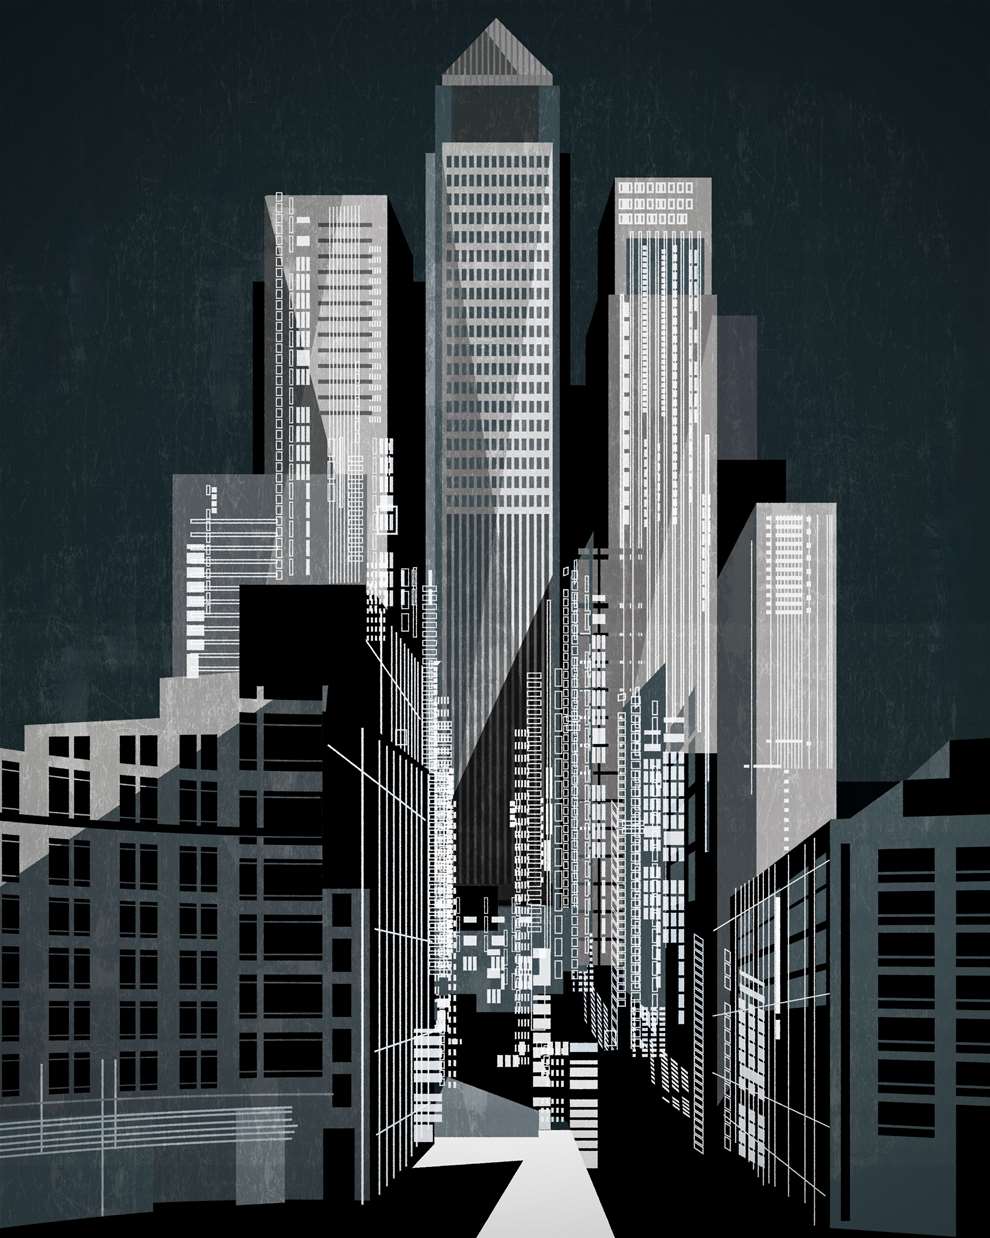 Paul Wearing, Digital Vector Architectural illustration of City Westferry Circus skyscrapers and buildings, on a dark background.